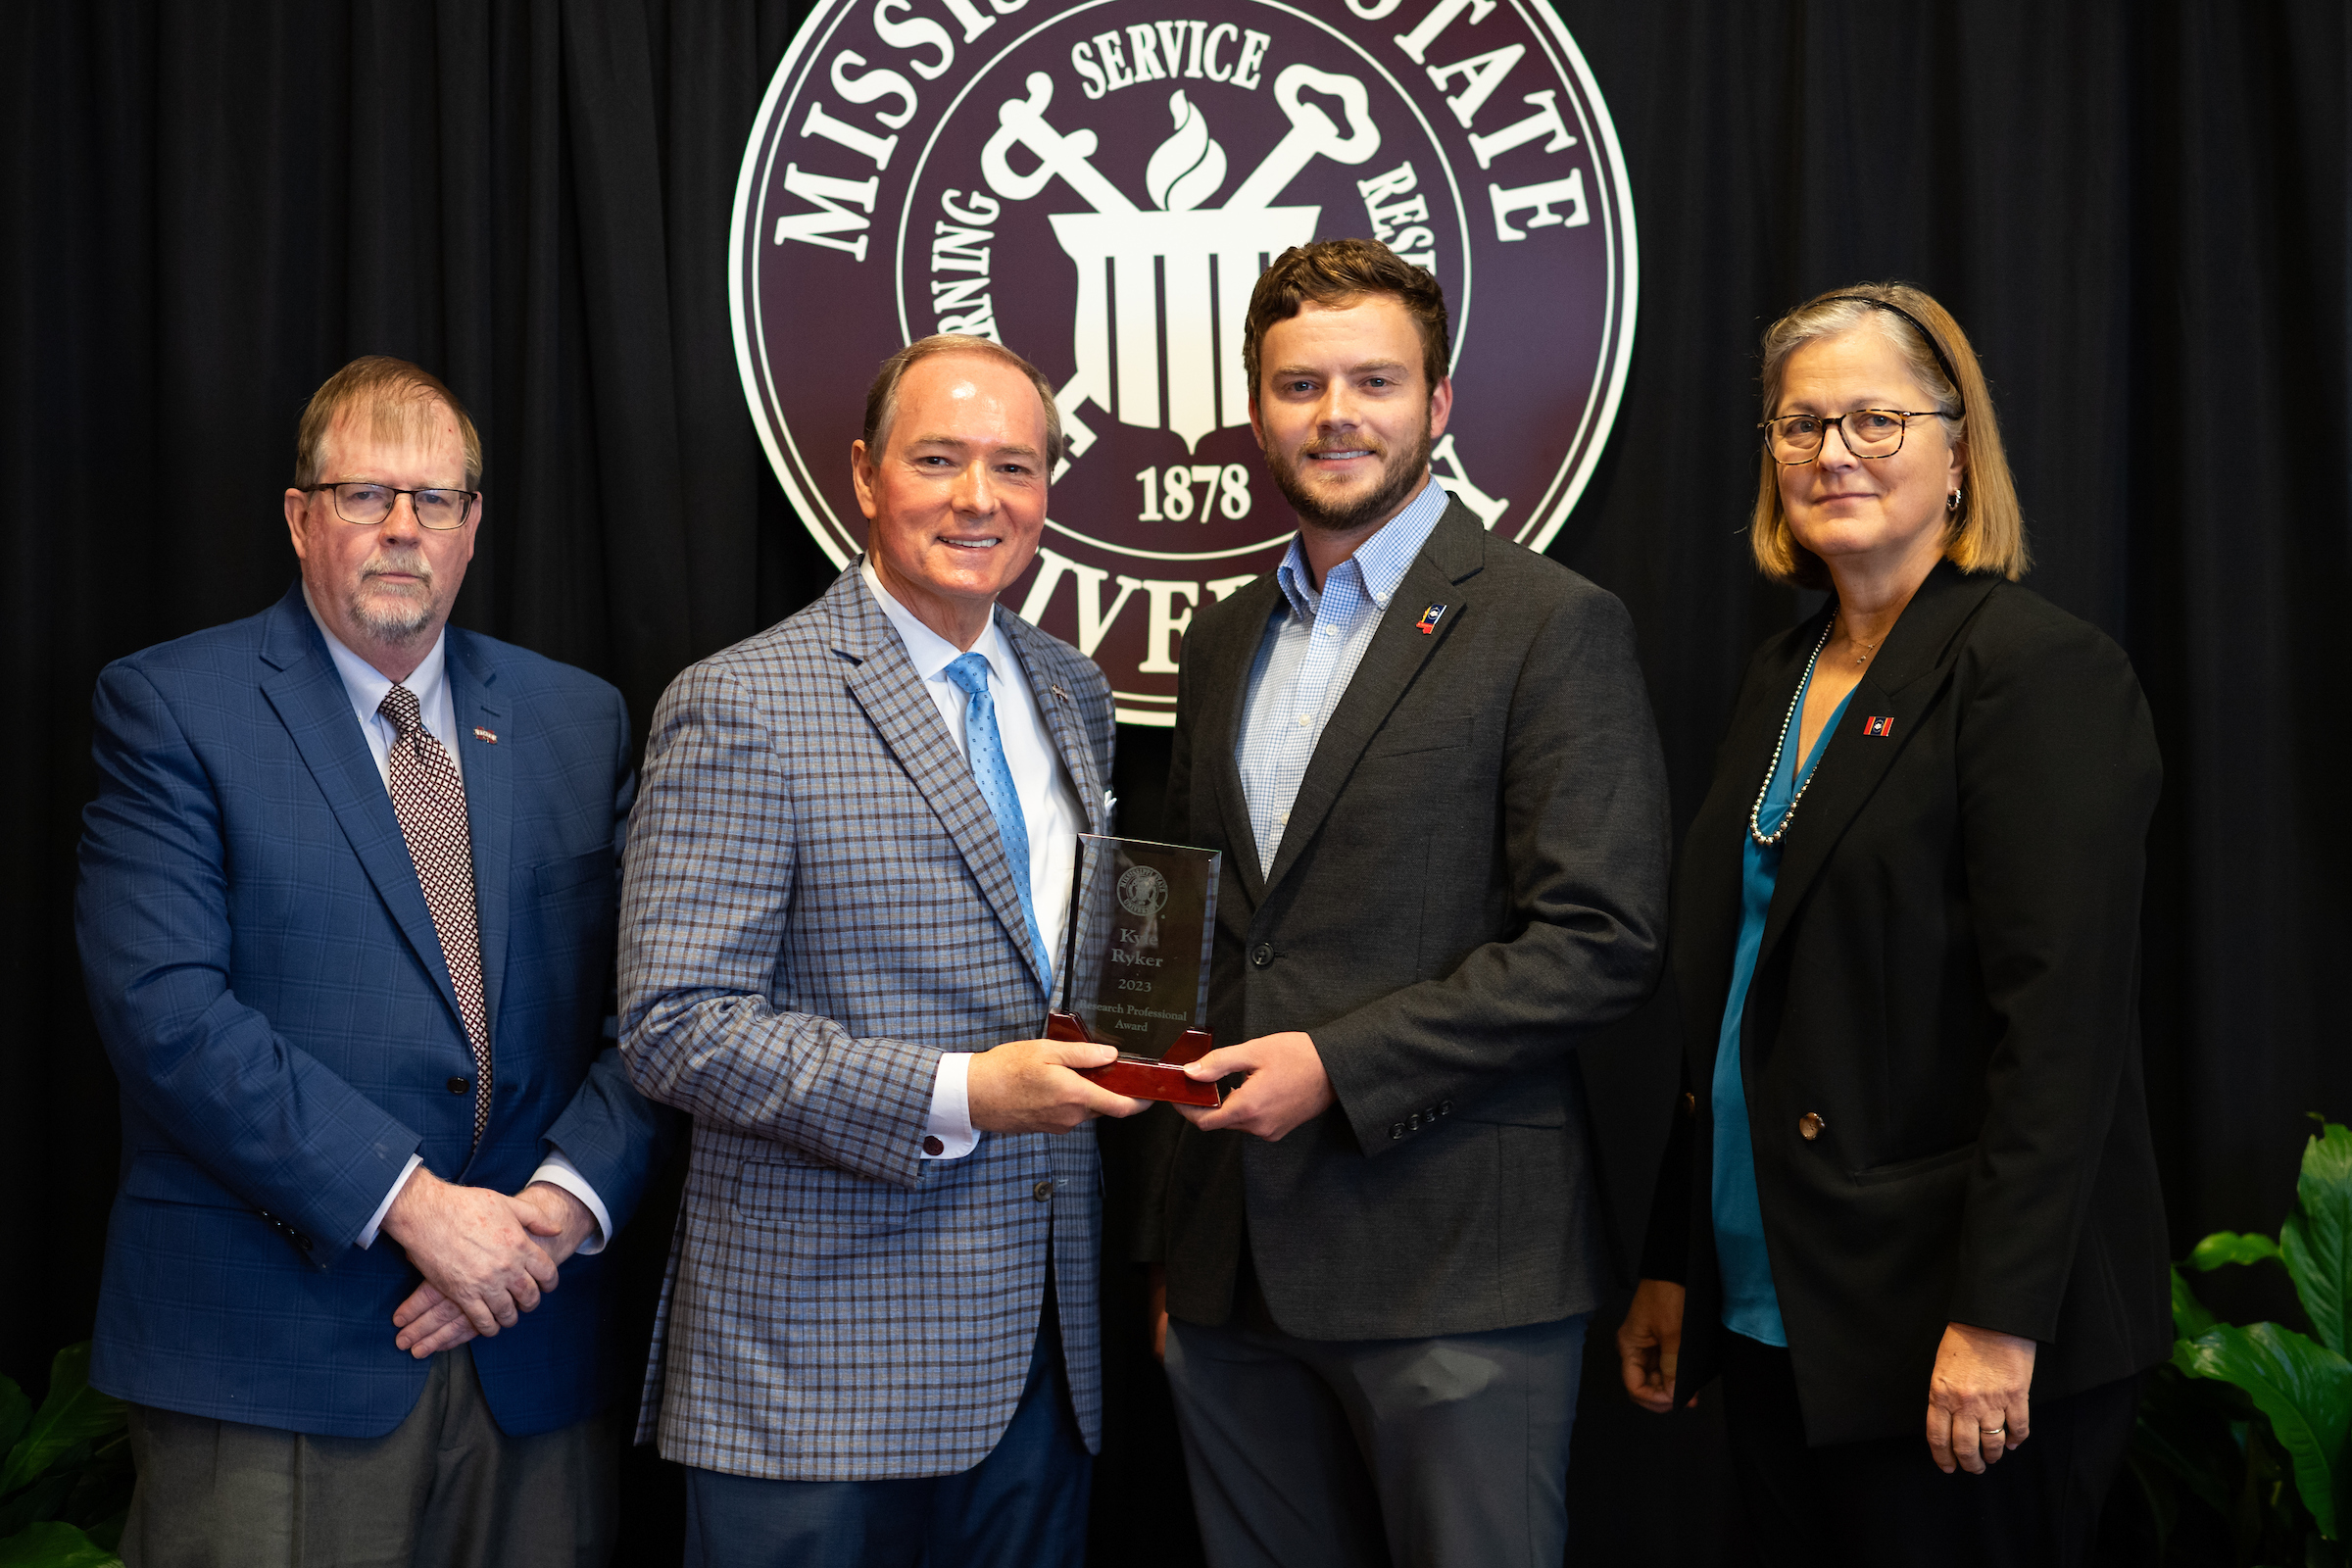 Kyle Ryker with President Keenum receiving Research Professional award